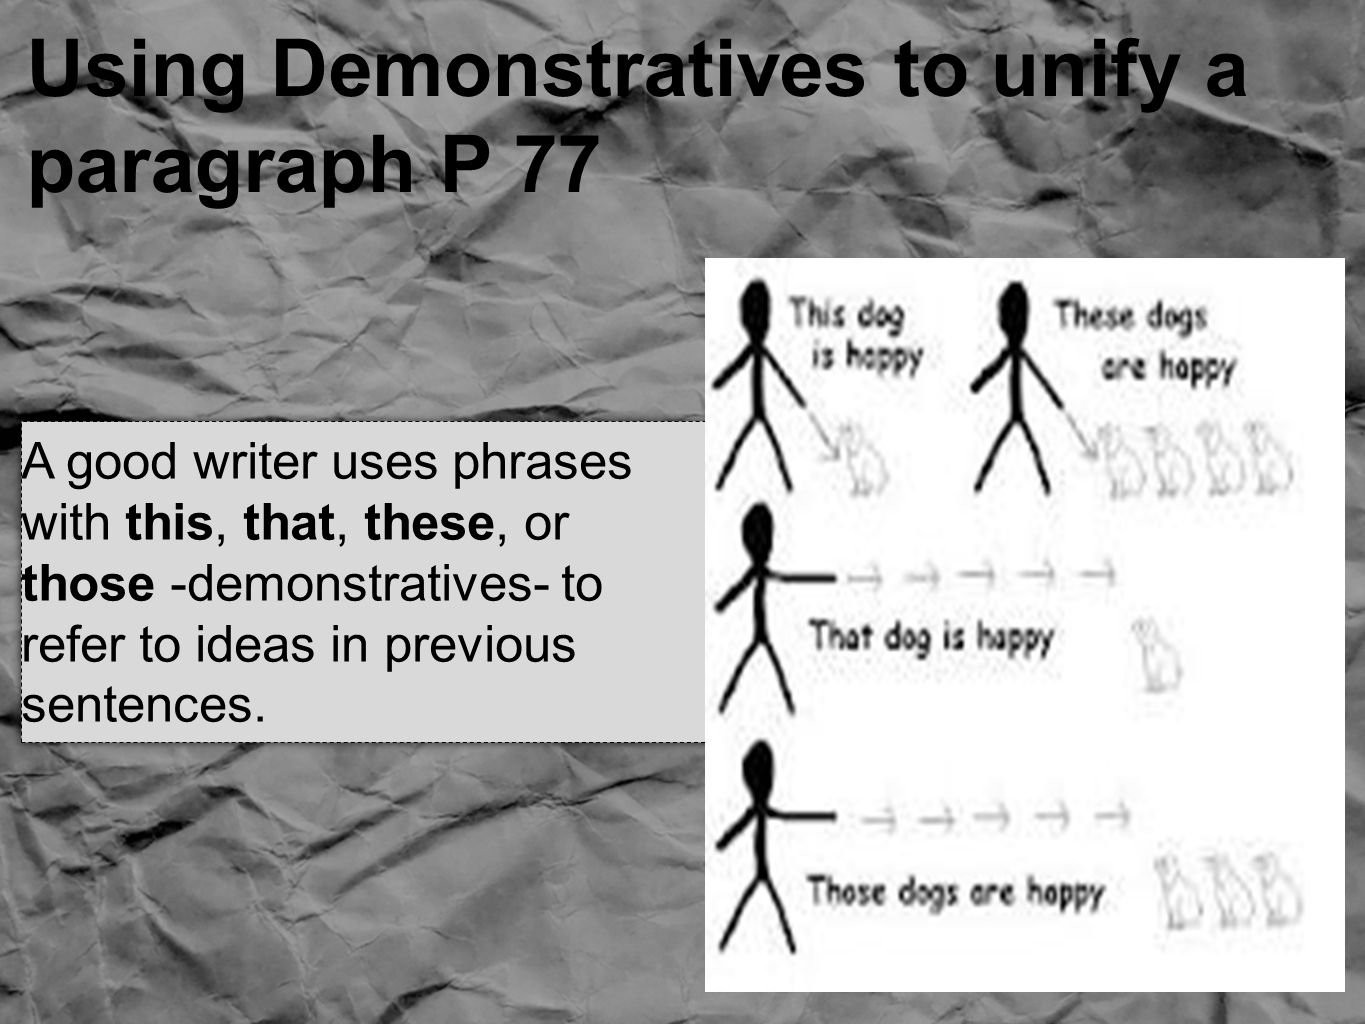 Using Demonstratives to unify a paragraph P 77 A good writer uses phrases with this, that, these, or those -demonstratives- to refer to ideas in previous sentences.